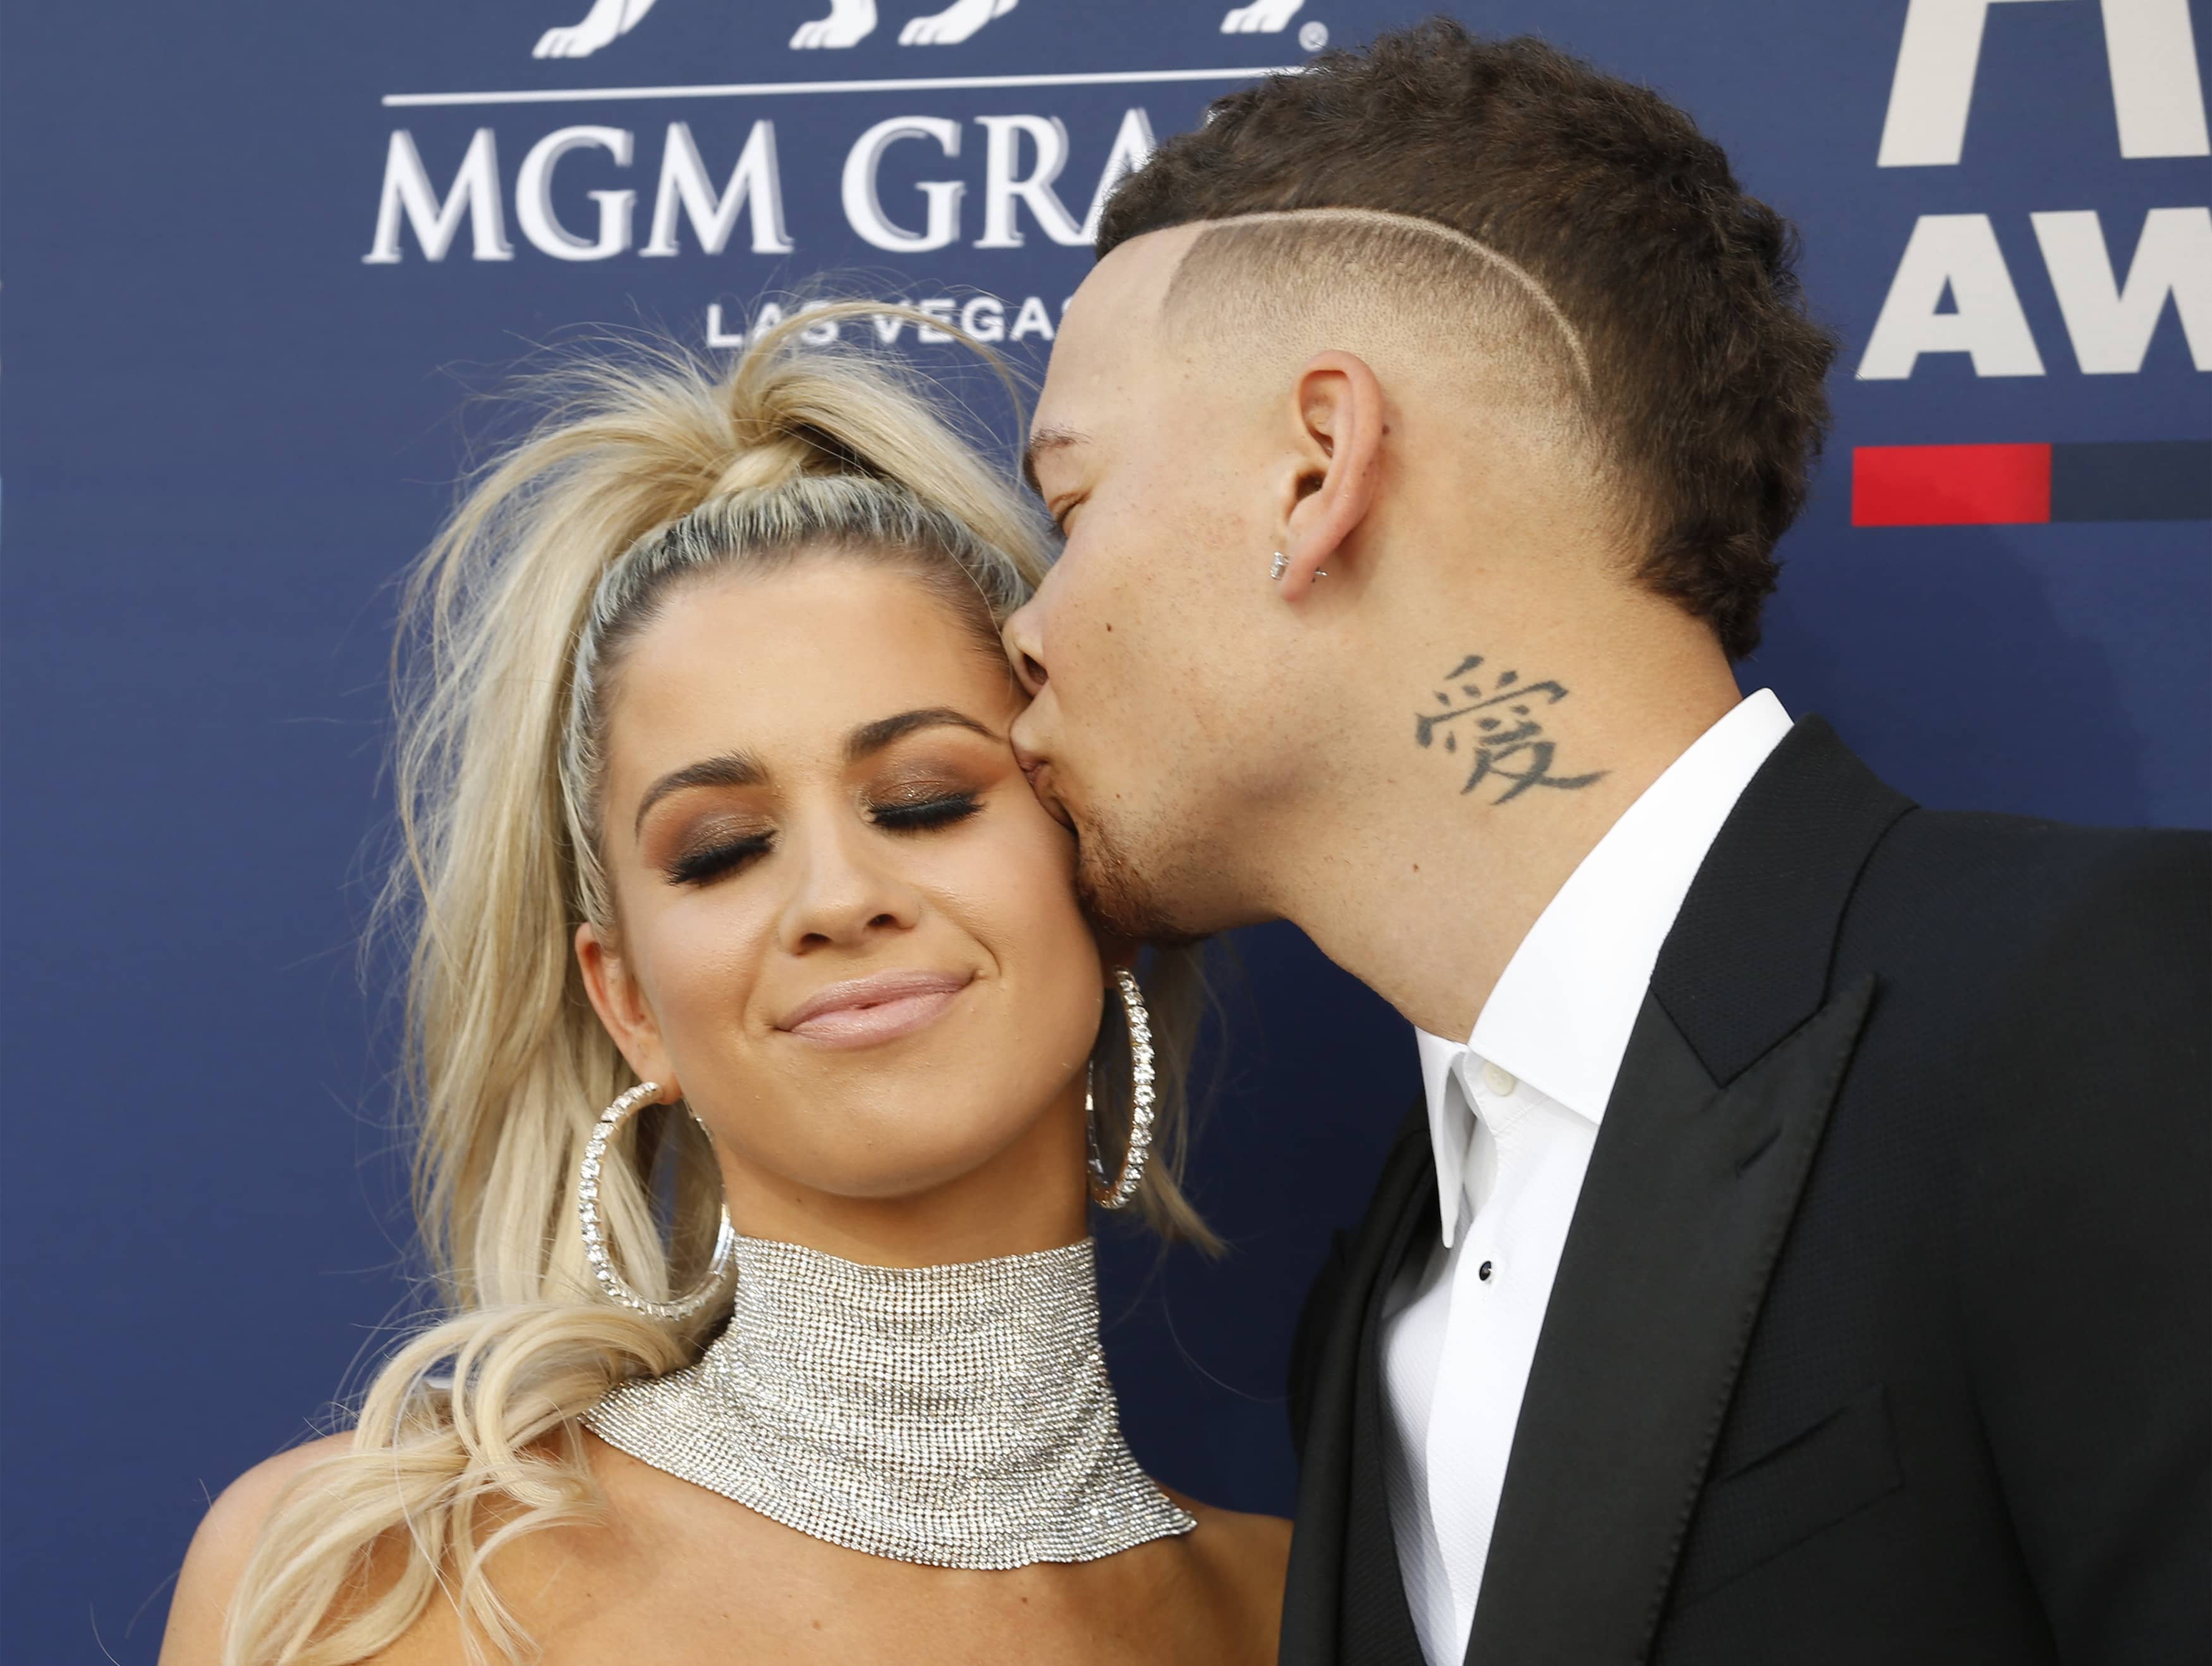 54th-academy-of-country-music-awards-arrivals-las-vegas-nevada-u-s-april-7-2019-kane-and-wife-katelyn-brown